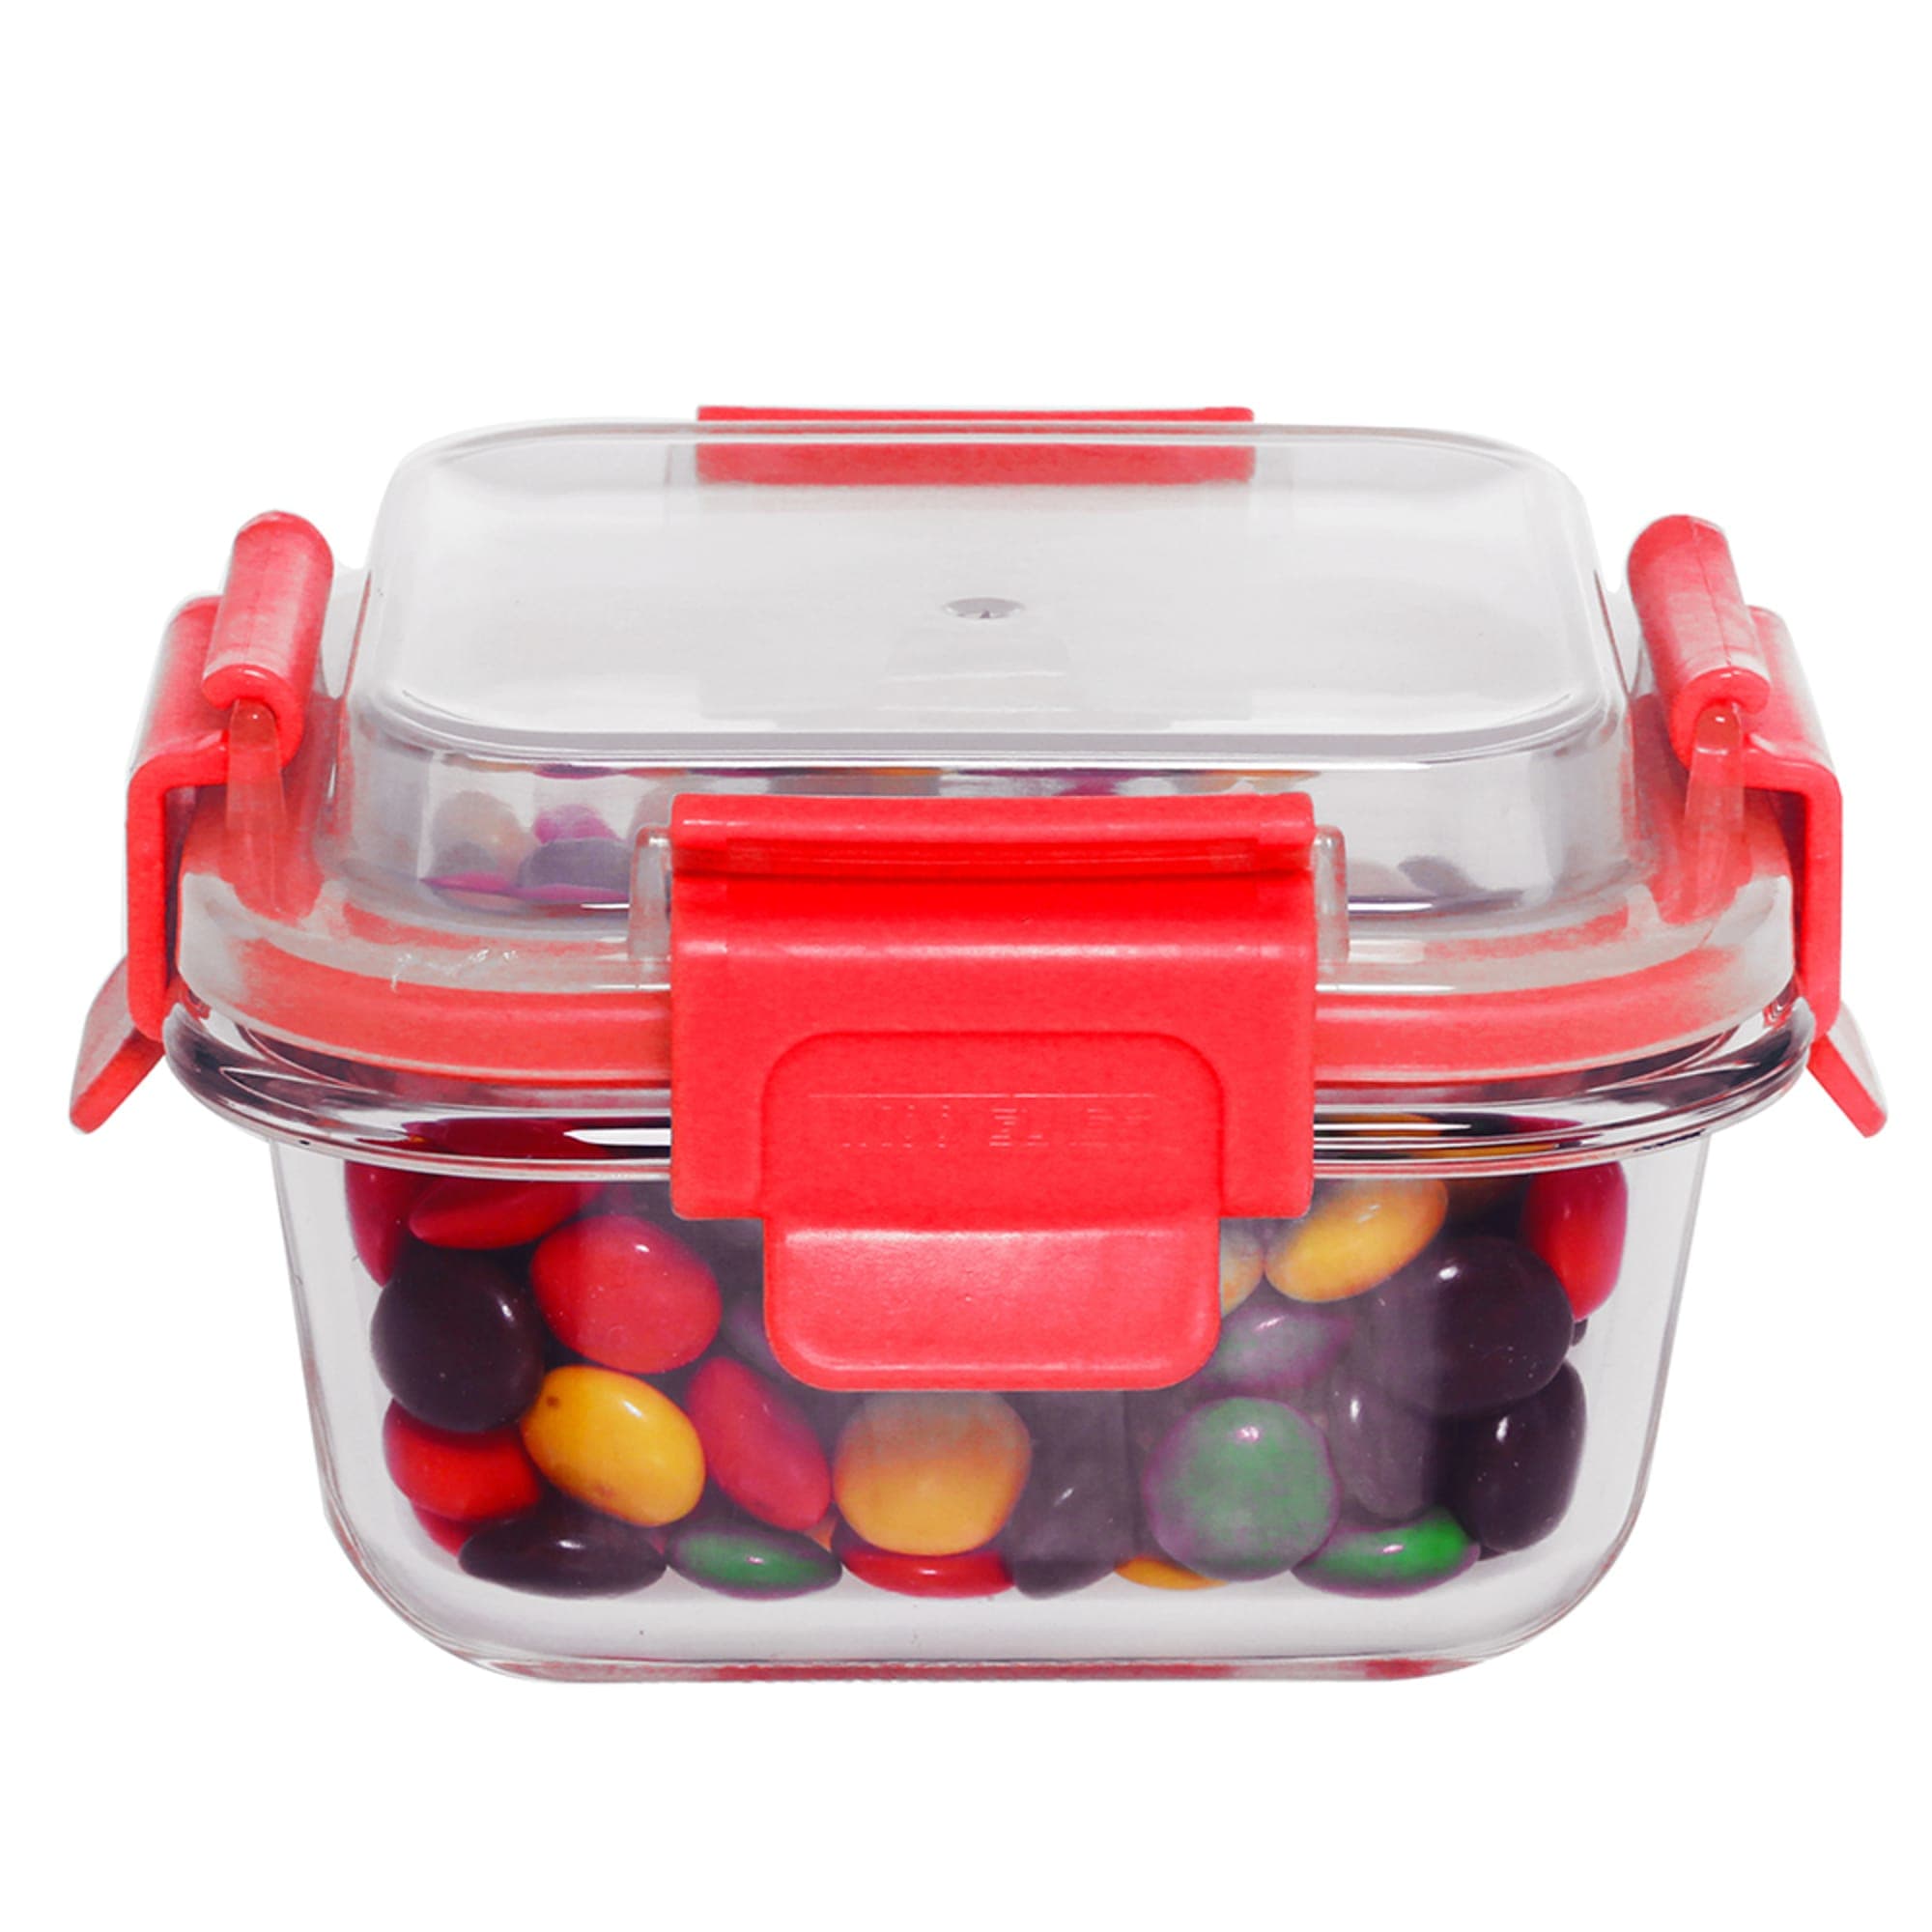 Home Basics 21oz. Rectangular Glass Food Storage Container With Plastic Lid, Red $5.00 EACH, CASE PACK OF 12